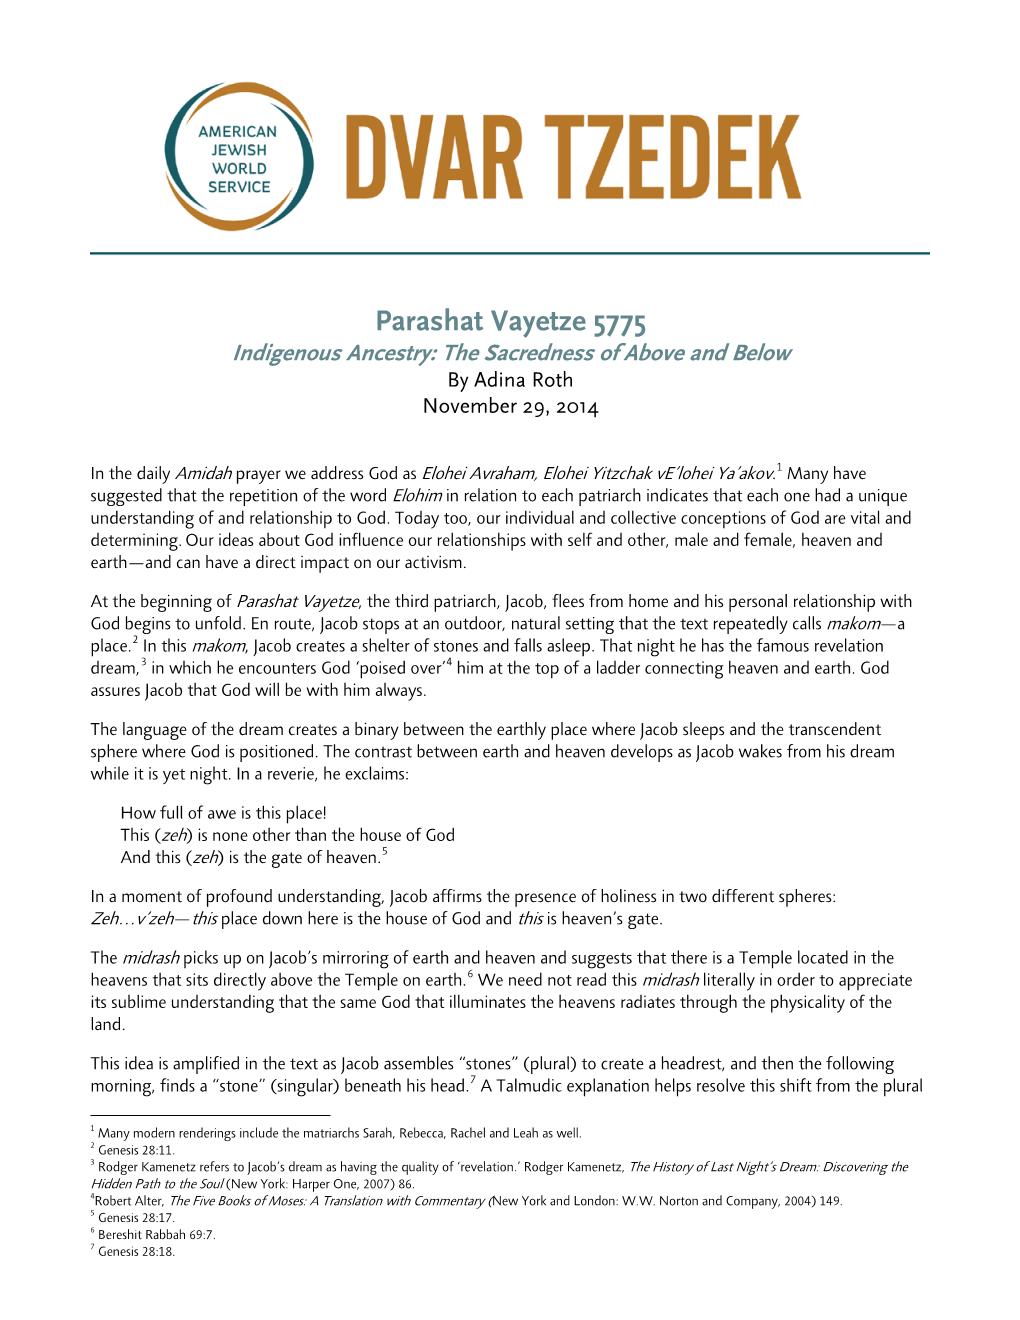 Parashat Vayetze 5775 Indigenous Ancestry: the Sacredness of Above and Below by Adina Roth November 29, 2014